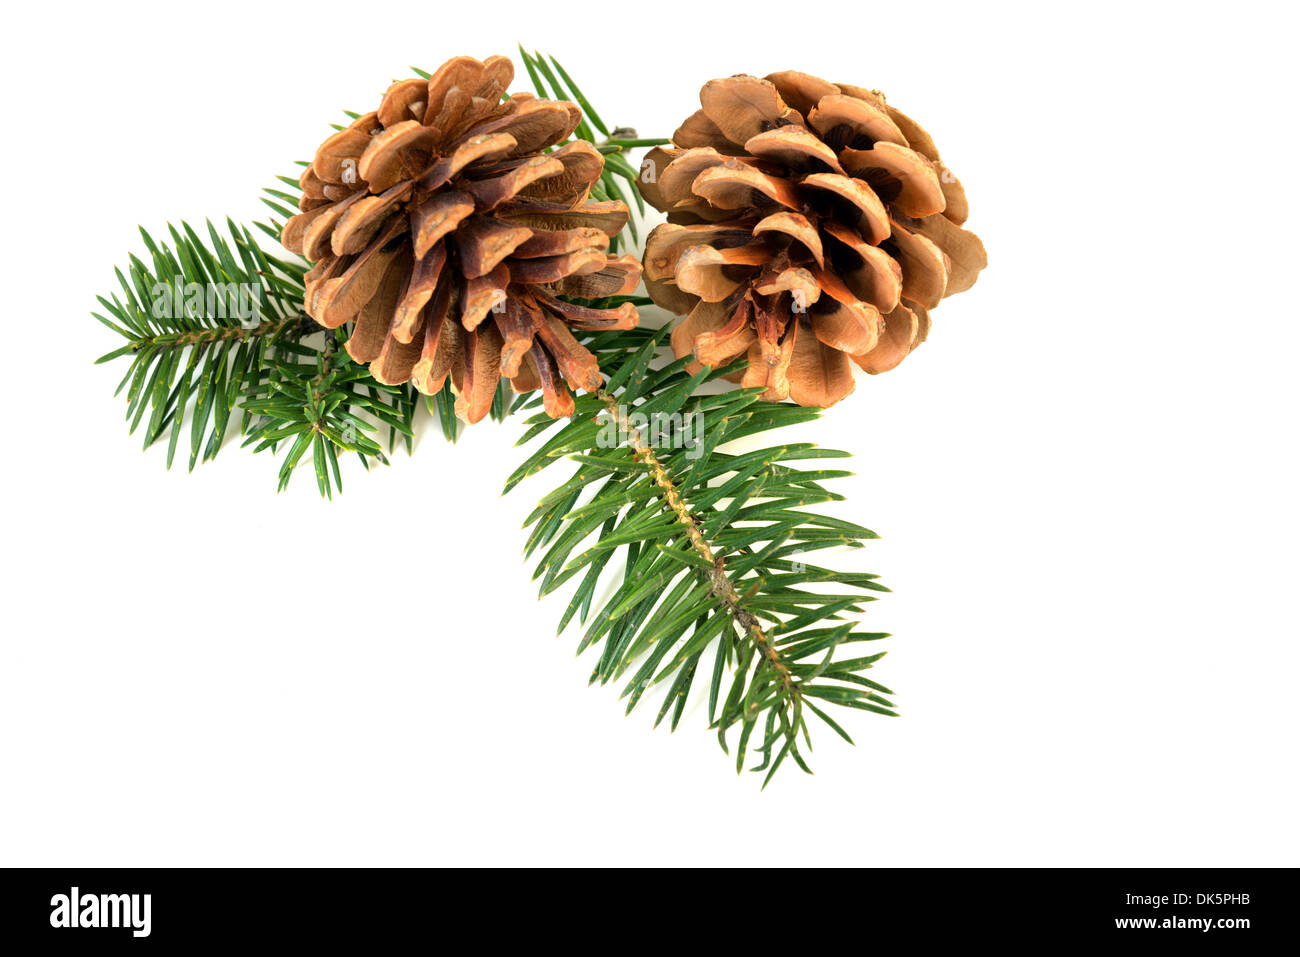 Pine cones with branch on a white background Stock Photo